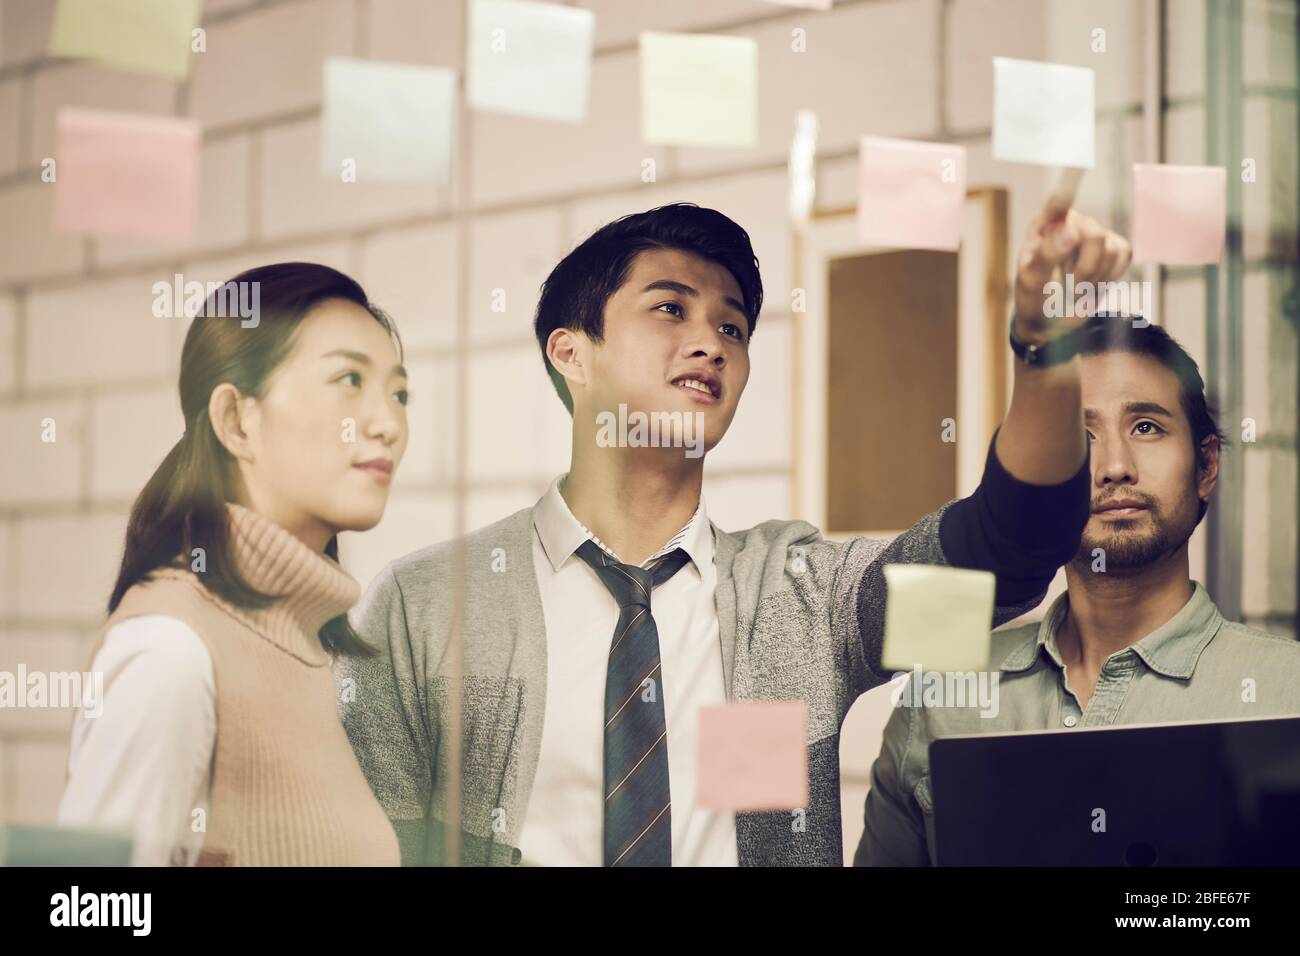 three asian small company businesspeople young entrepreneurs meeing discussing in office using sticky notes Stock Photo